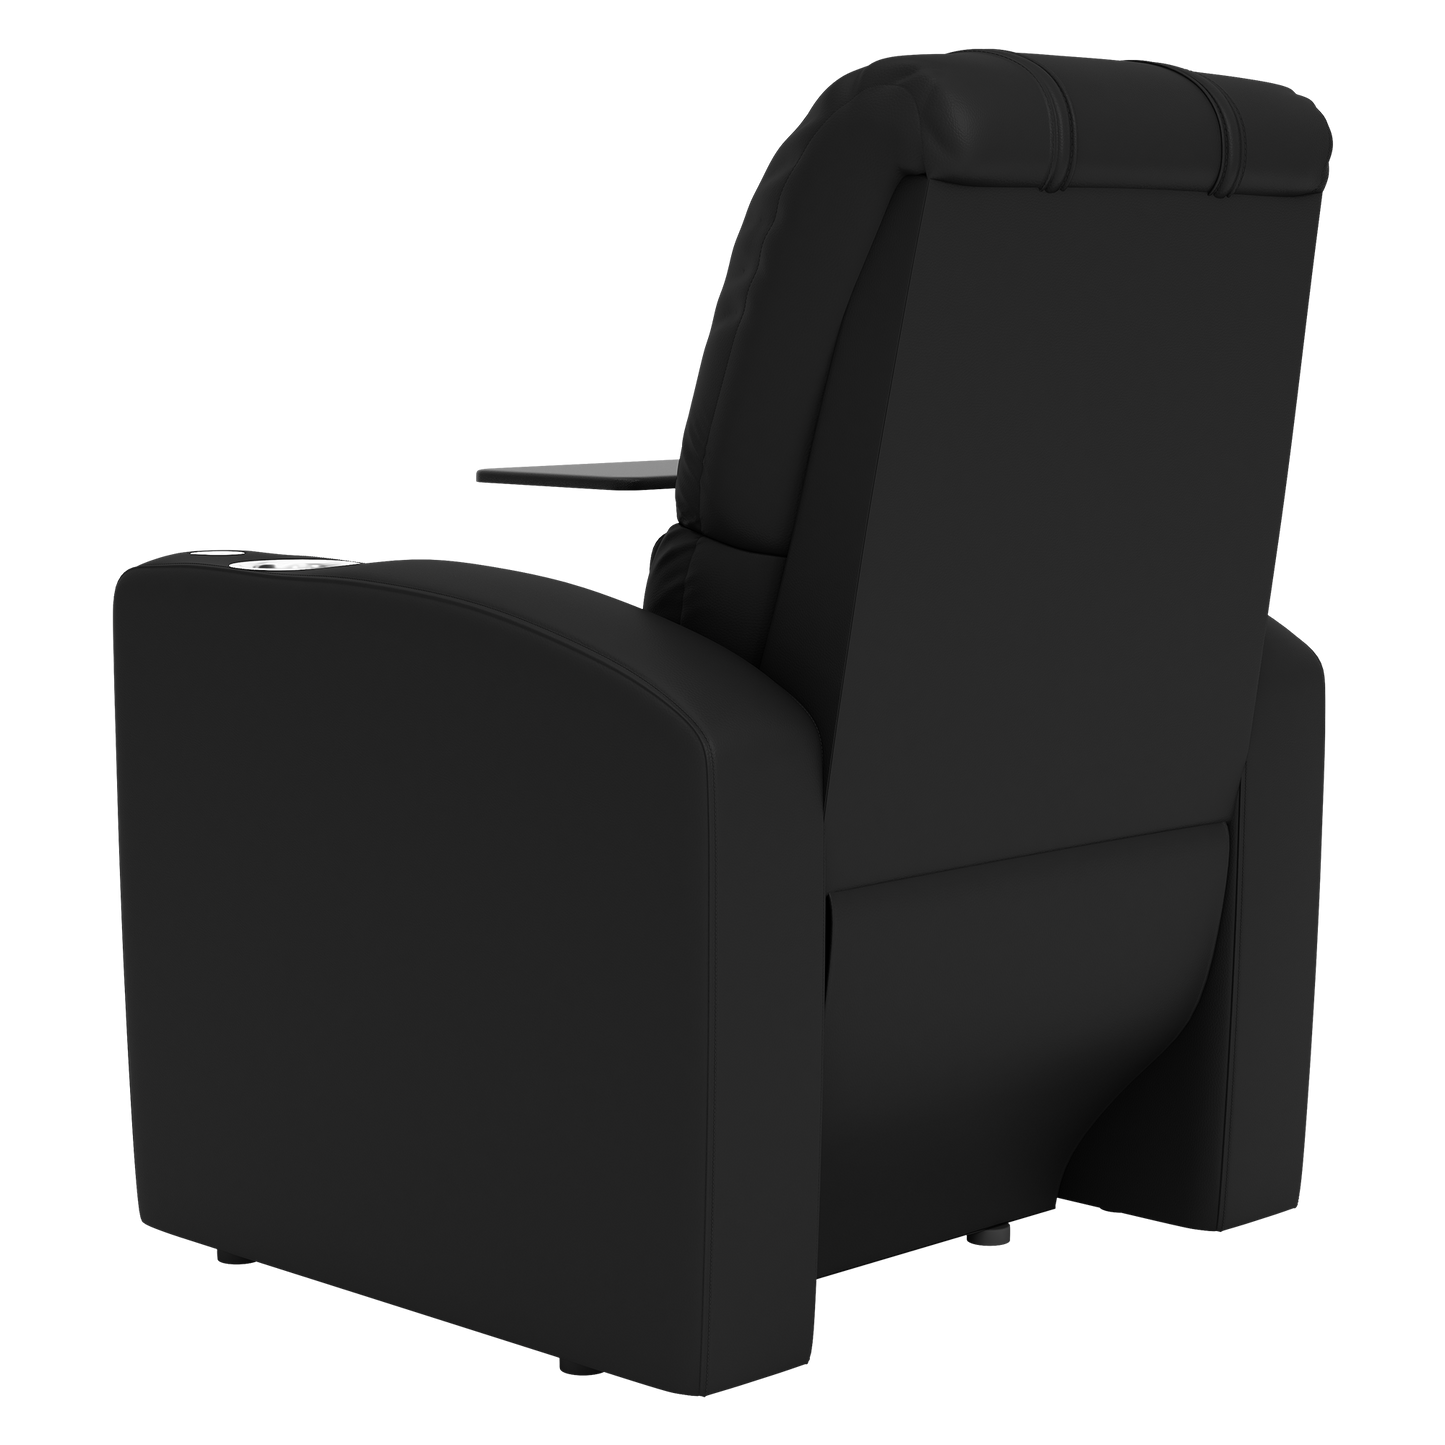 Stealth Power Plus Recliner with Florida Gators Letter F Logo Panel